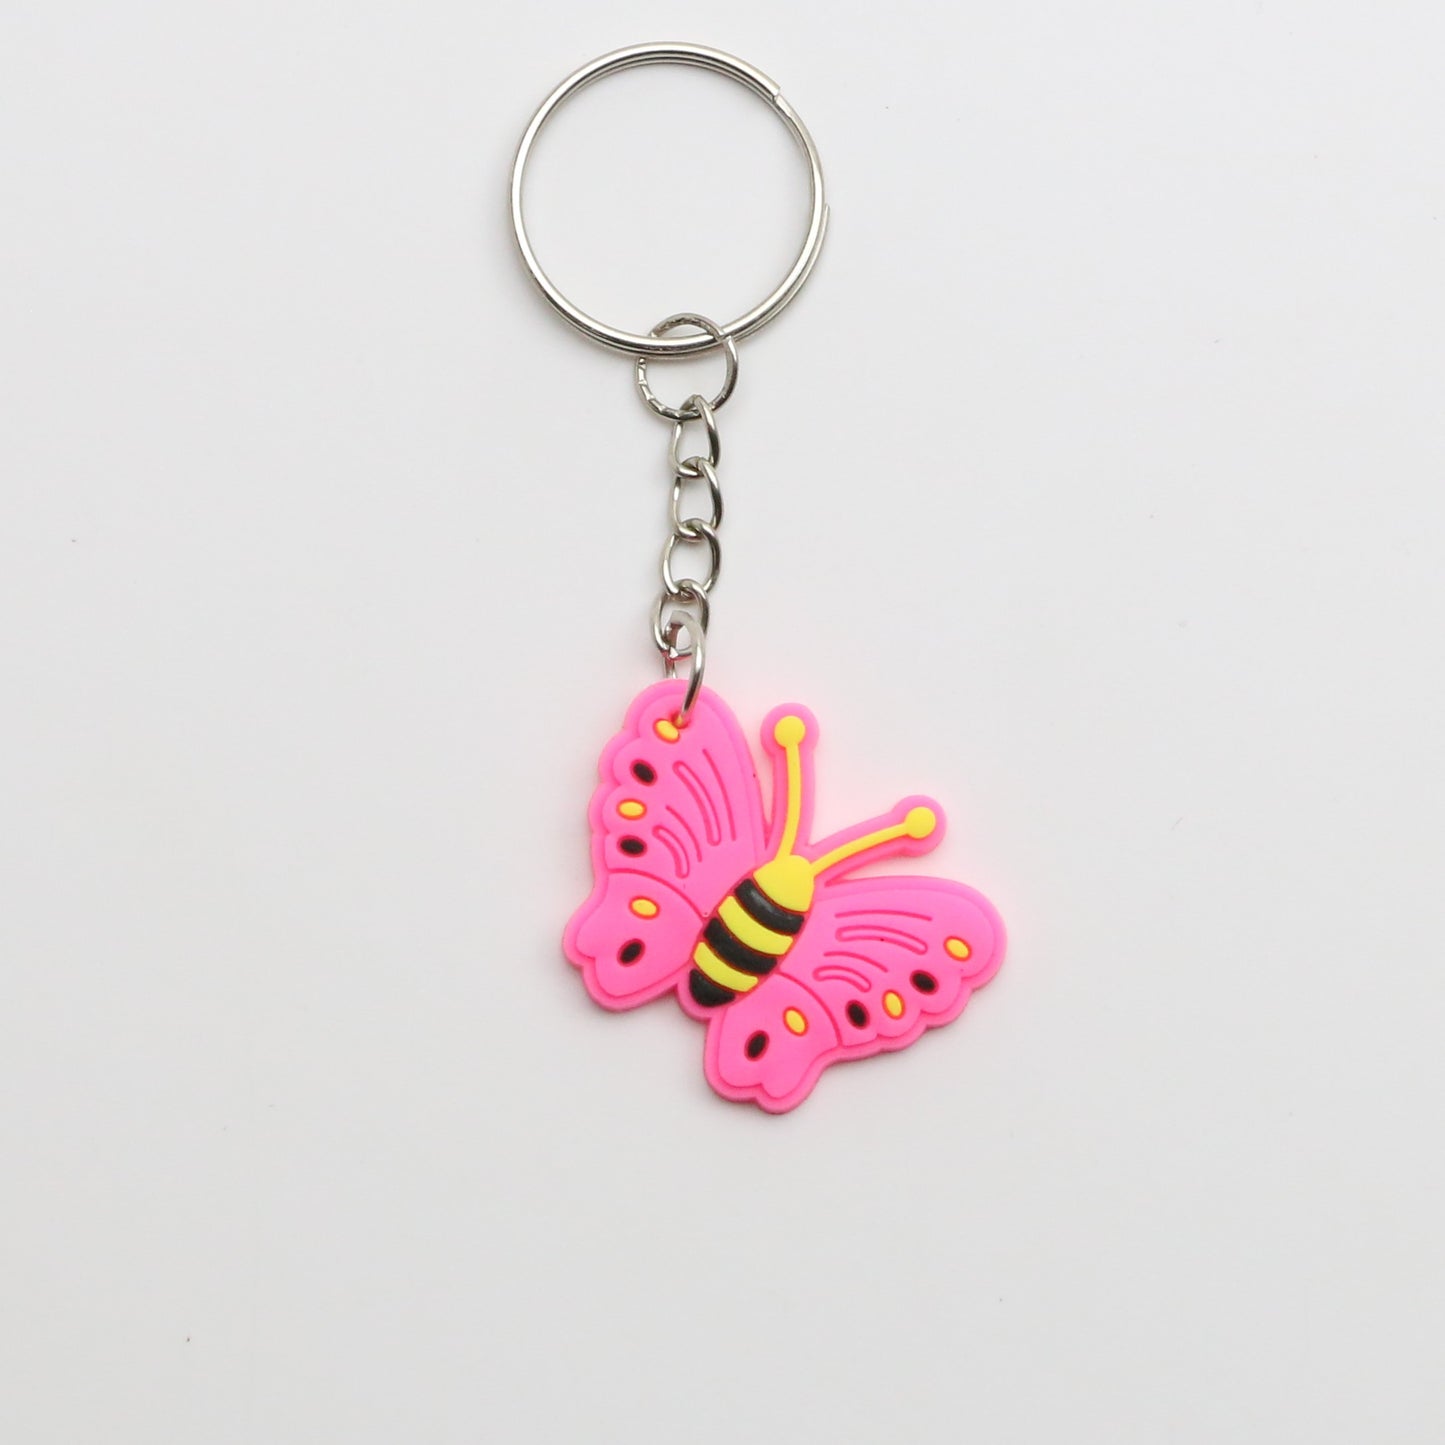 8100104K - Charm - Keychain - Butterfly - Pink